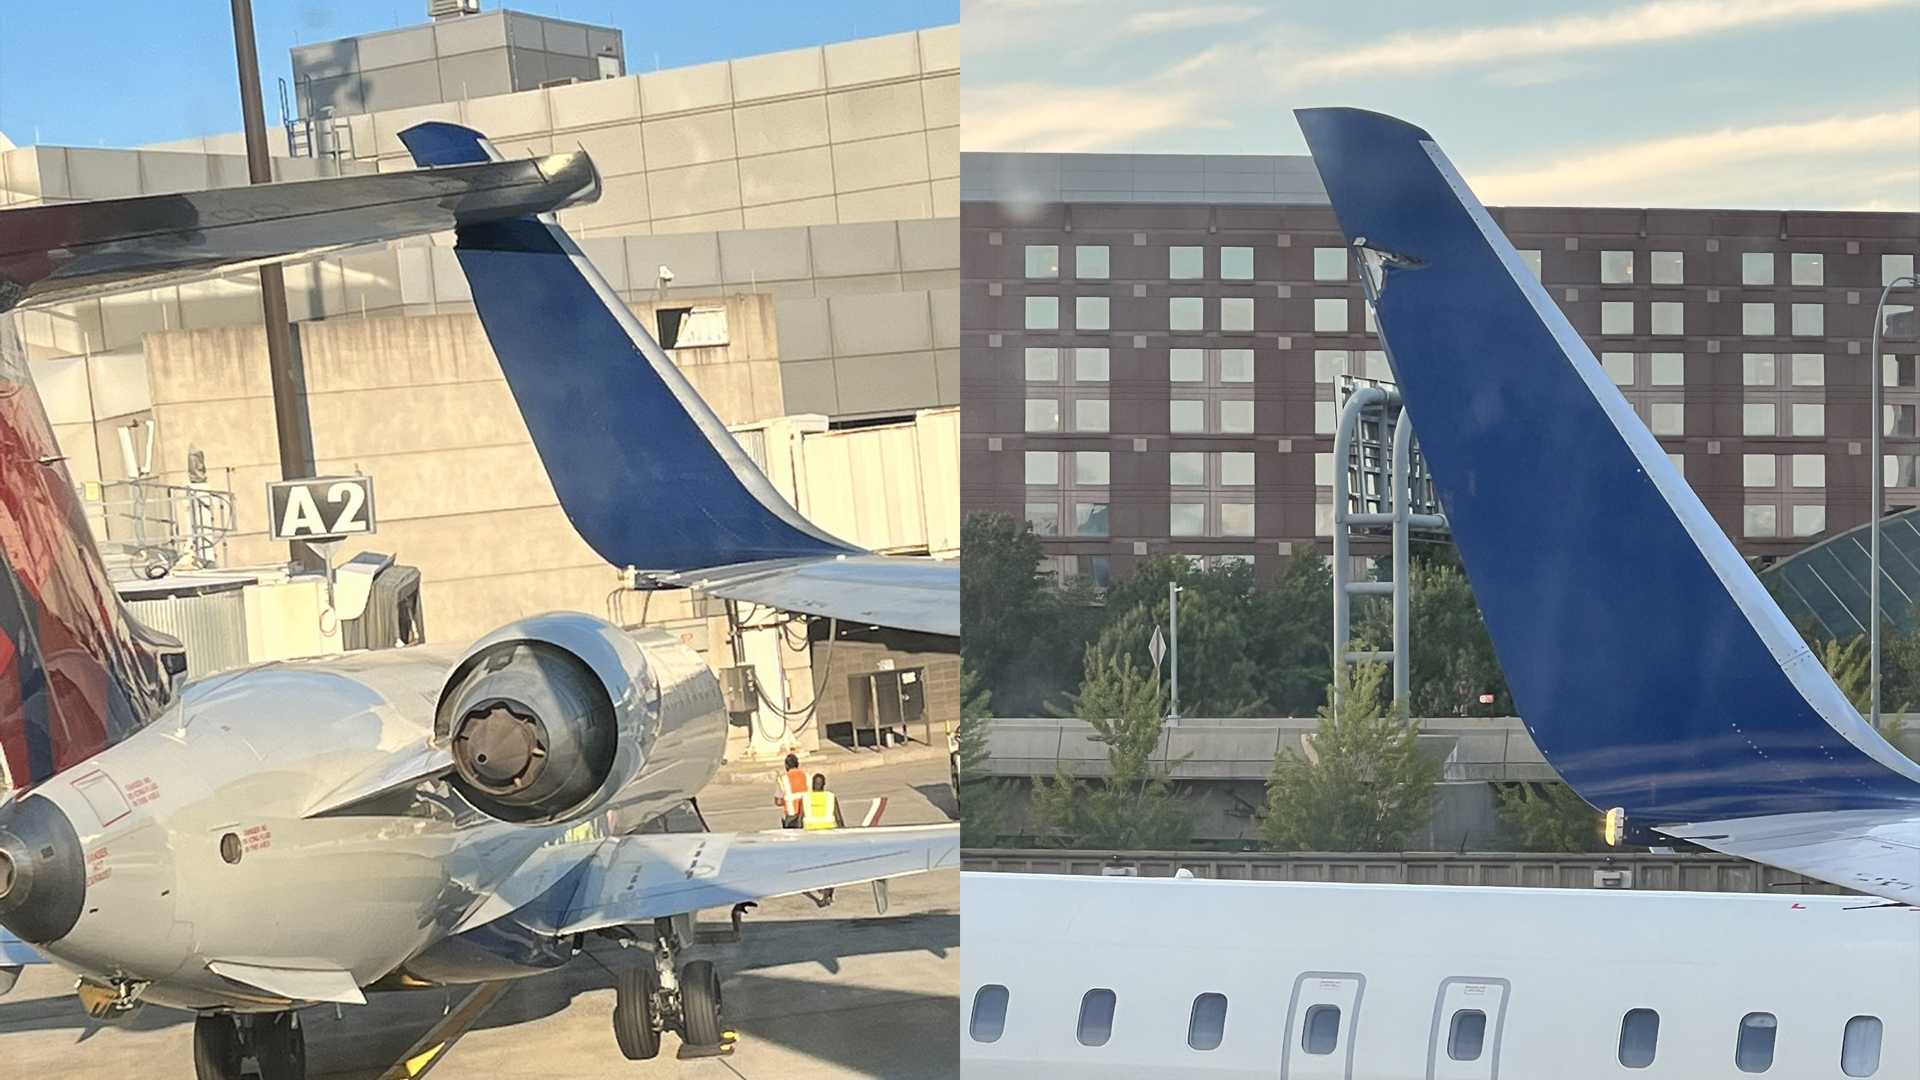 Plane collides with another plane while taxiing at Logan Airport